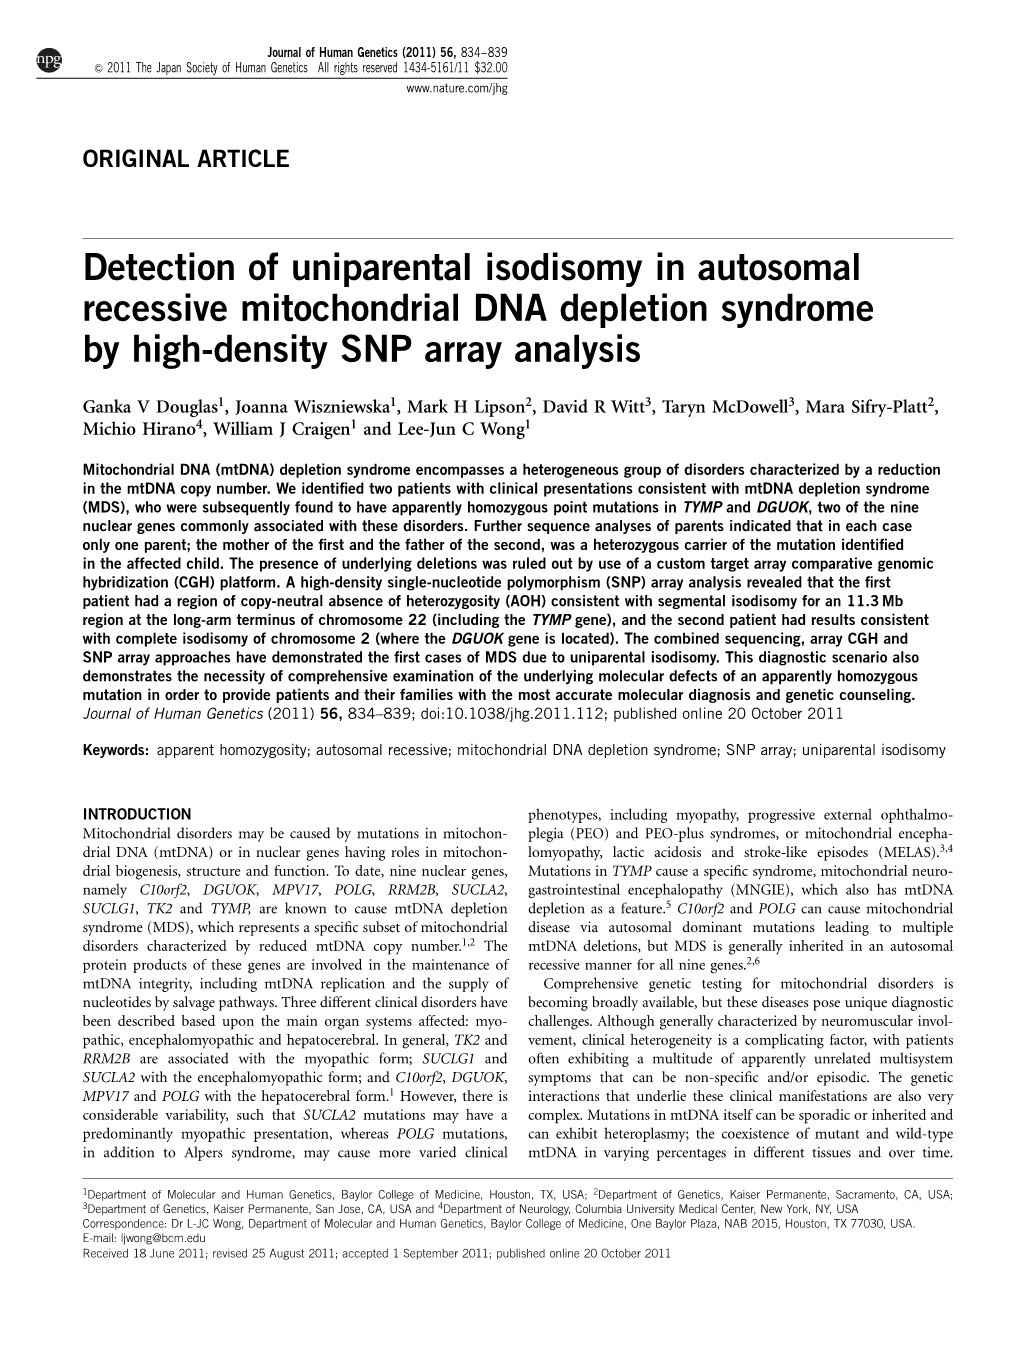 Detection of Uniparental Isodisomy in Autosomal Recessive Mitochondrial DNA Depletion Syndrome by High-Density SNP Array Analysis